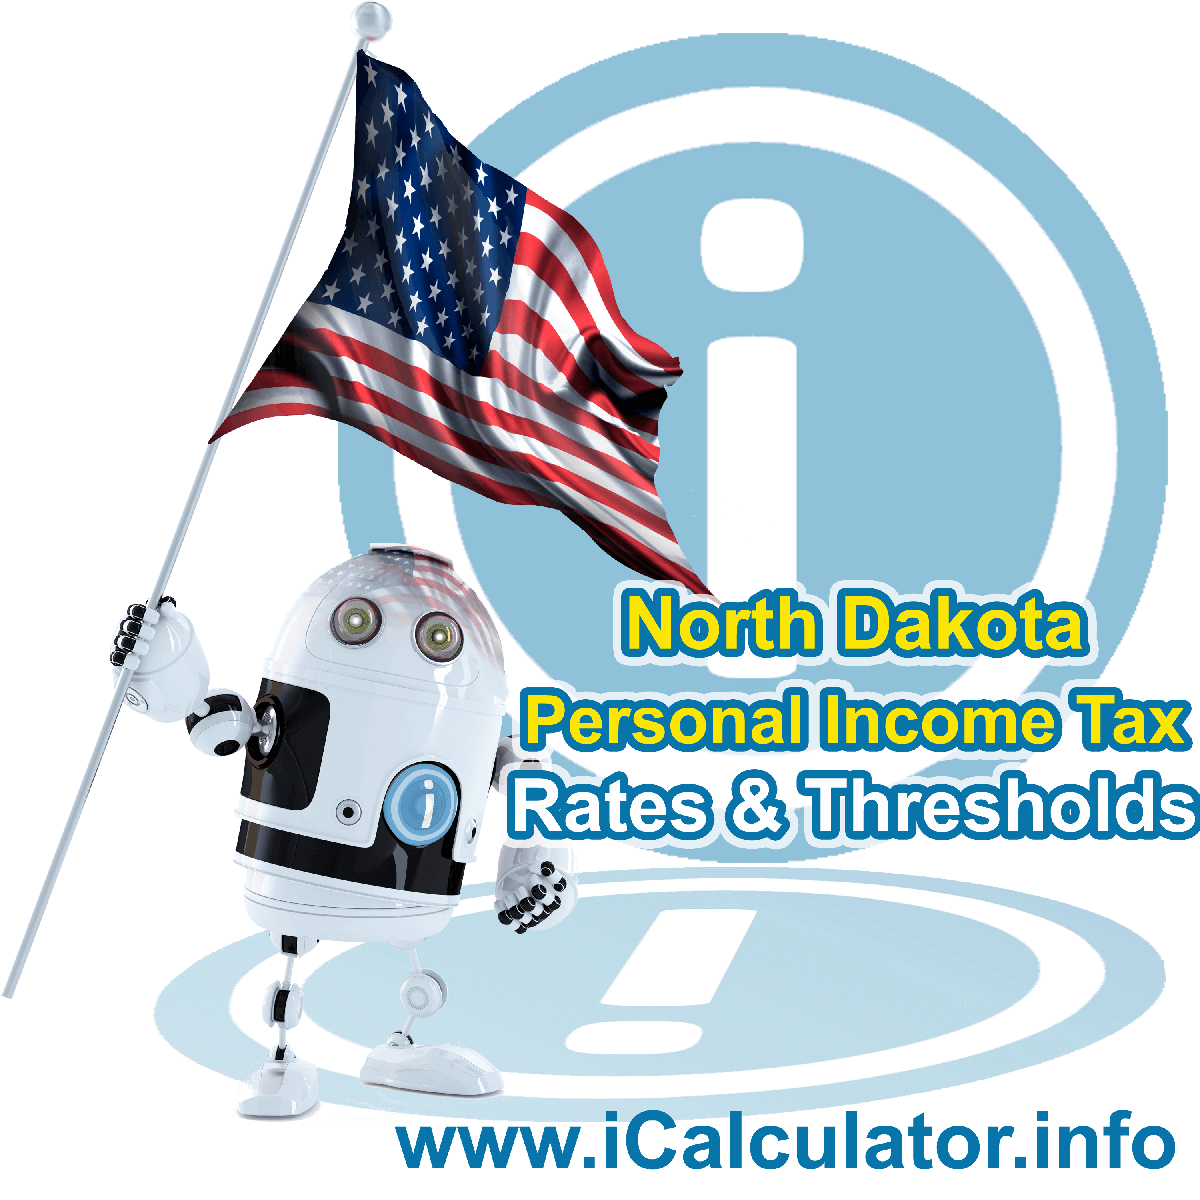 North Dakota State Tax Tables 2022. This image displays details of the North Dakota State Tax Tables for the 2022 tax return year which is provided in support of the 2022 US Tax Calculator